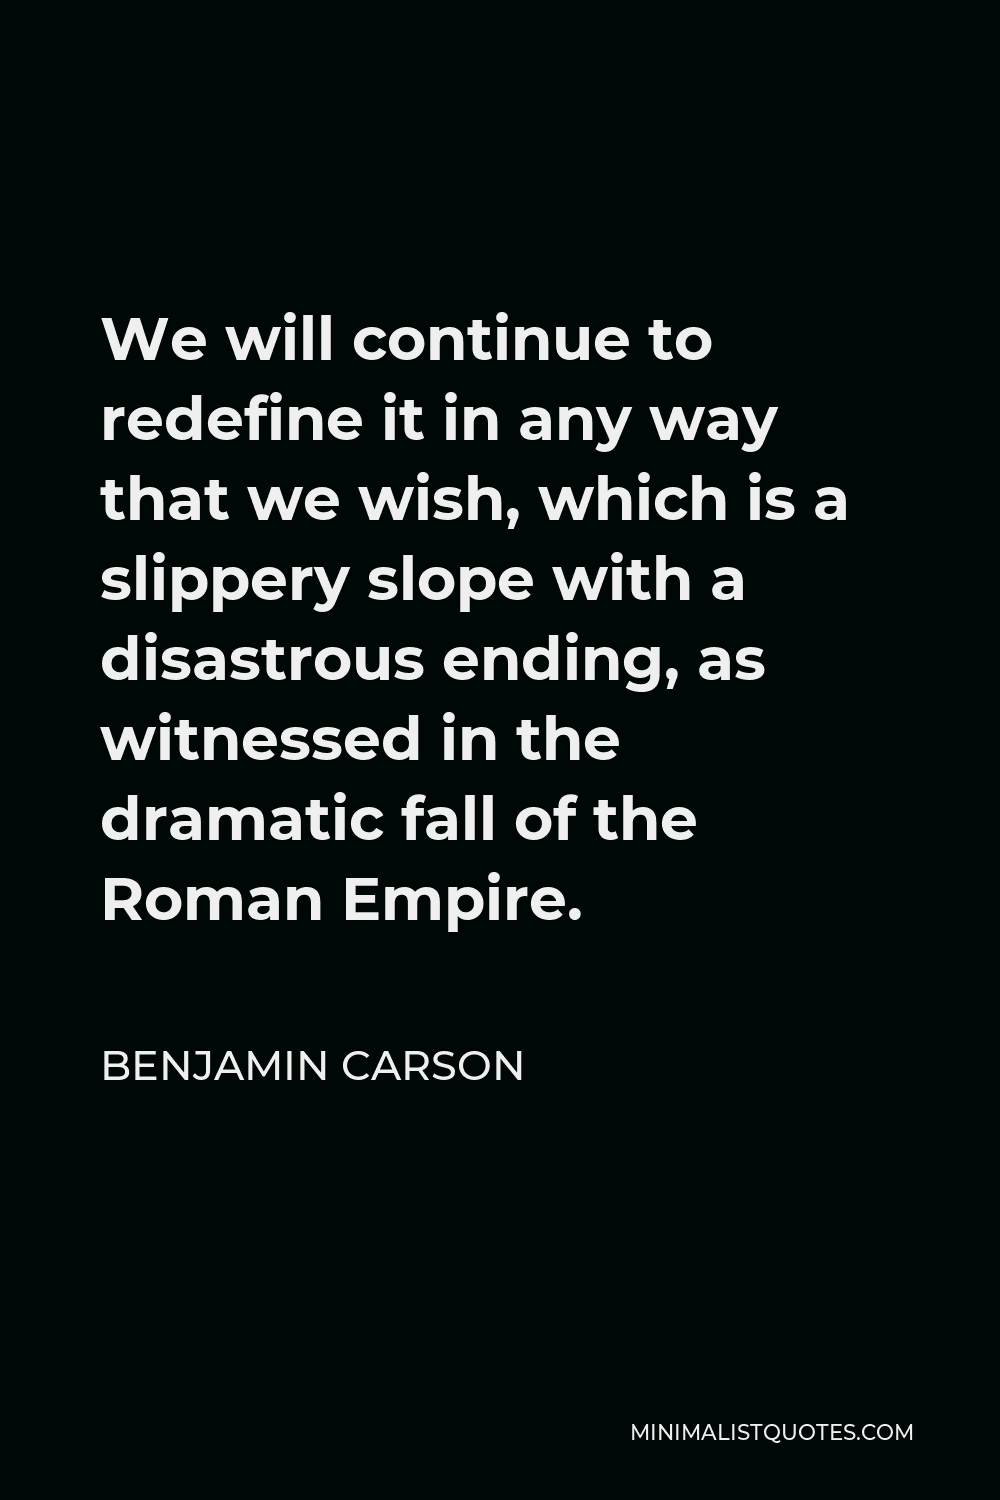 Benjamin Carson Quote - We will continue to redefine it in any way that we wish, which is a slippery slope with a disastrous ending, as witnessed in the dramatic fall of the Roman Empire.